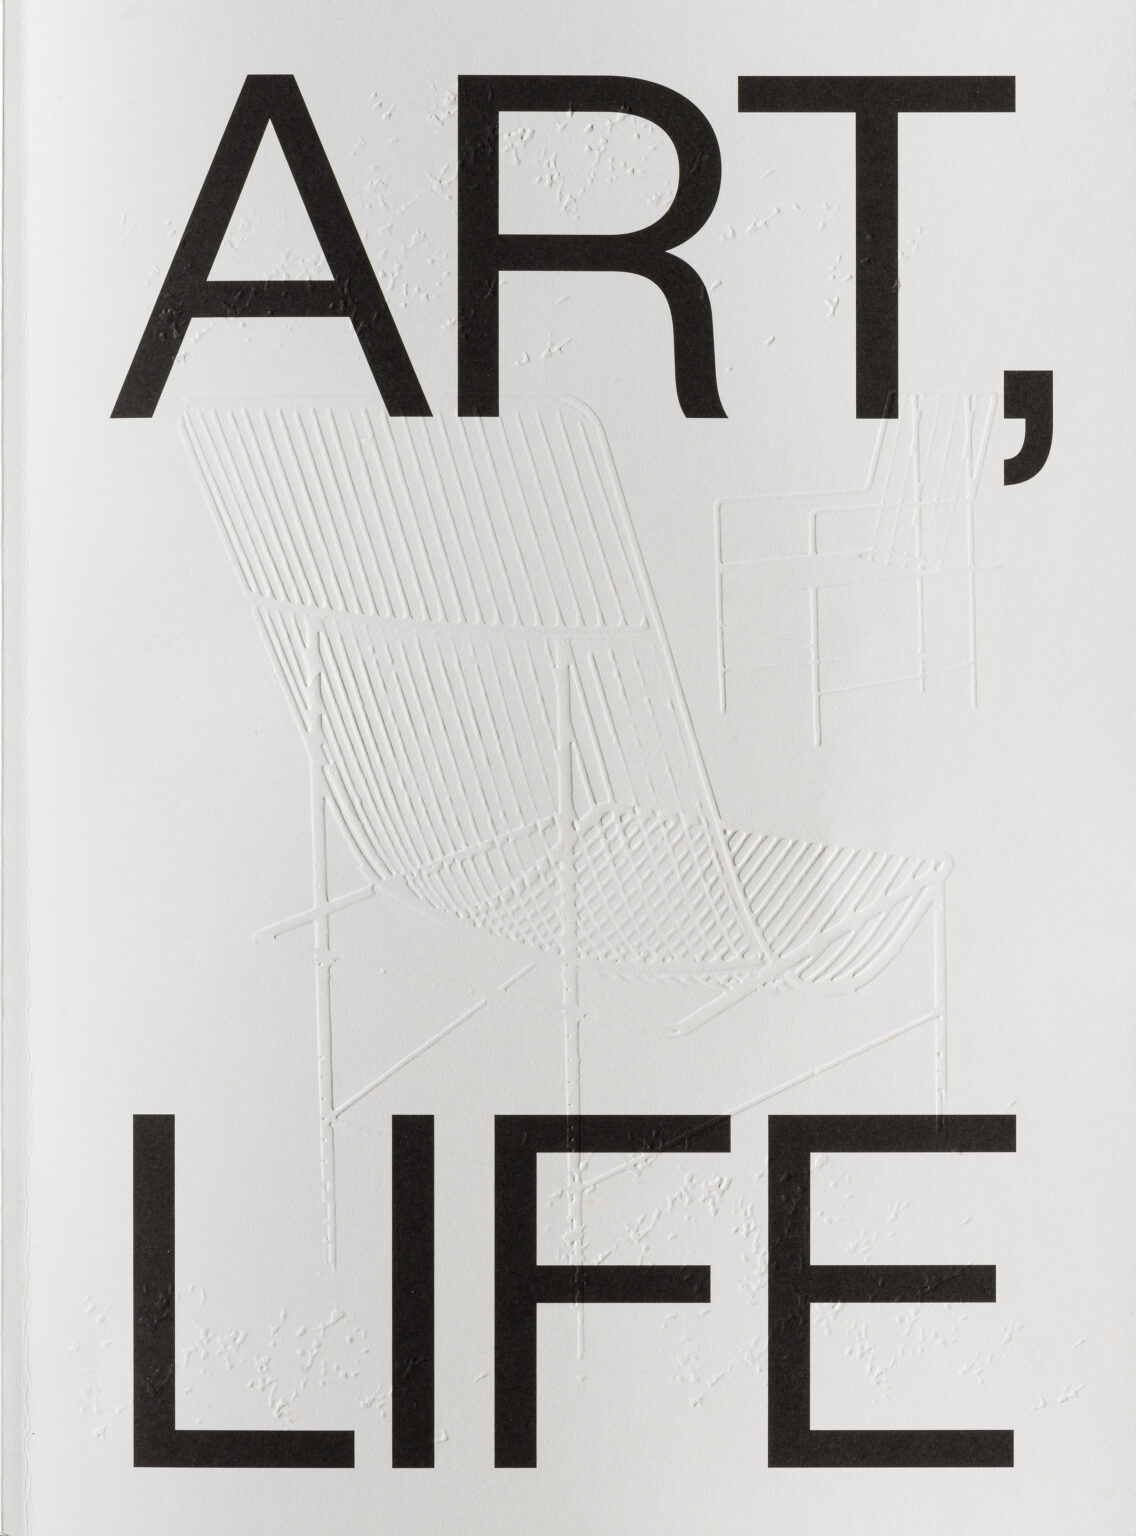 ART, LIFE. ART FOR LIFE. GUIDE TO UPM PERMANENT EXHIBITIONS